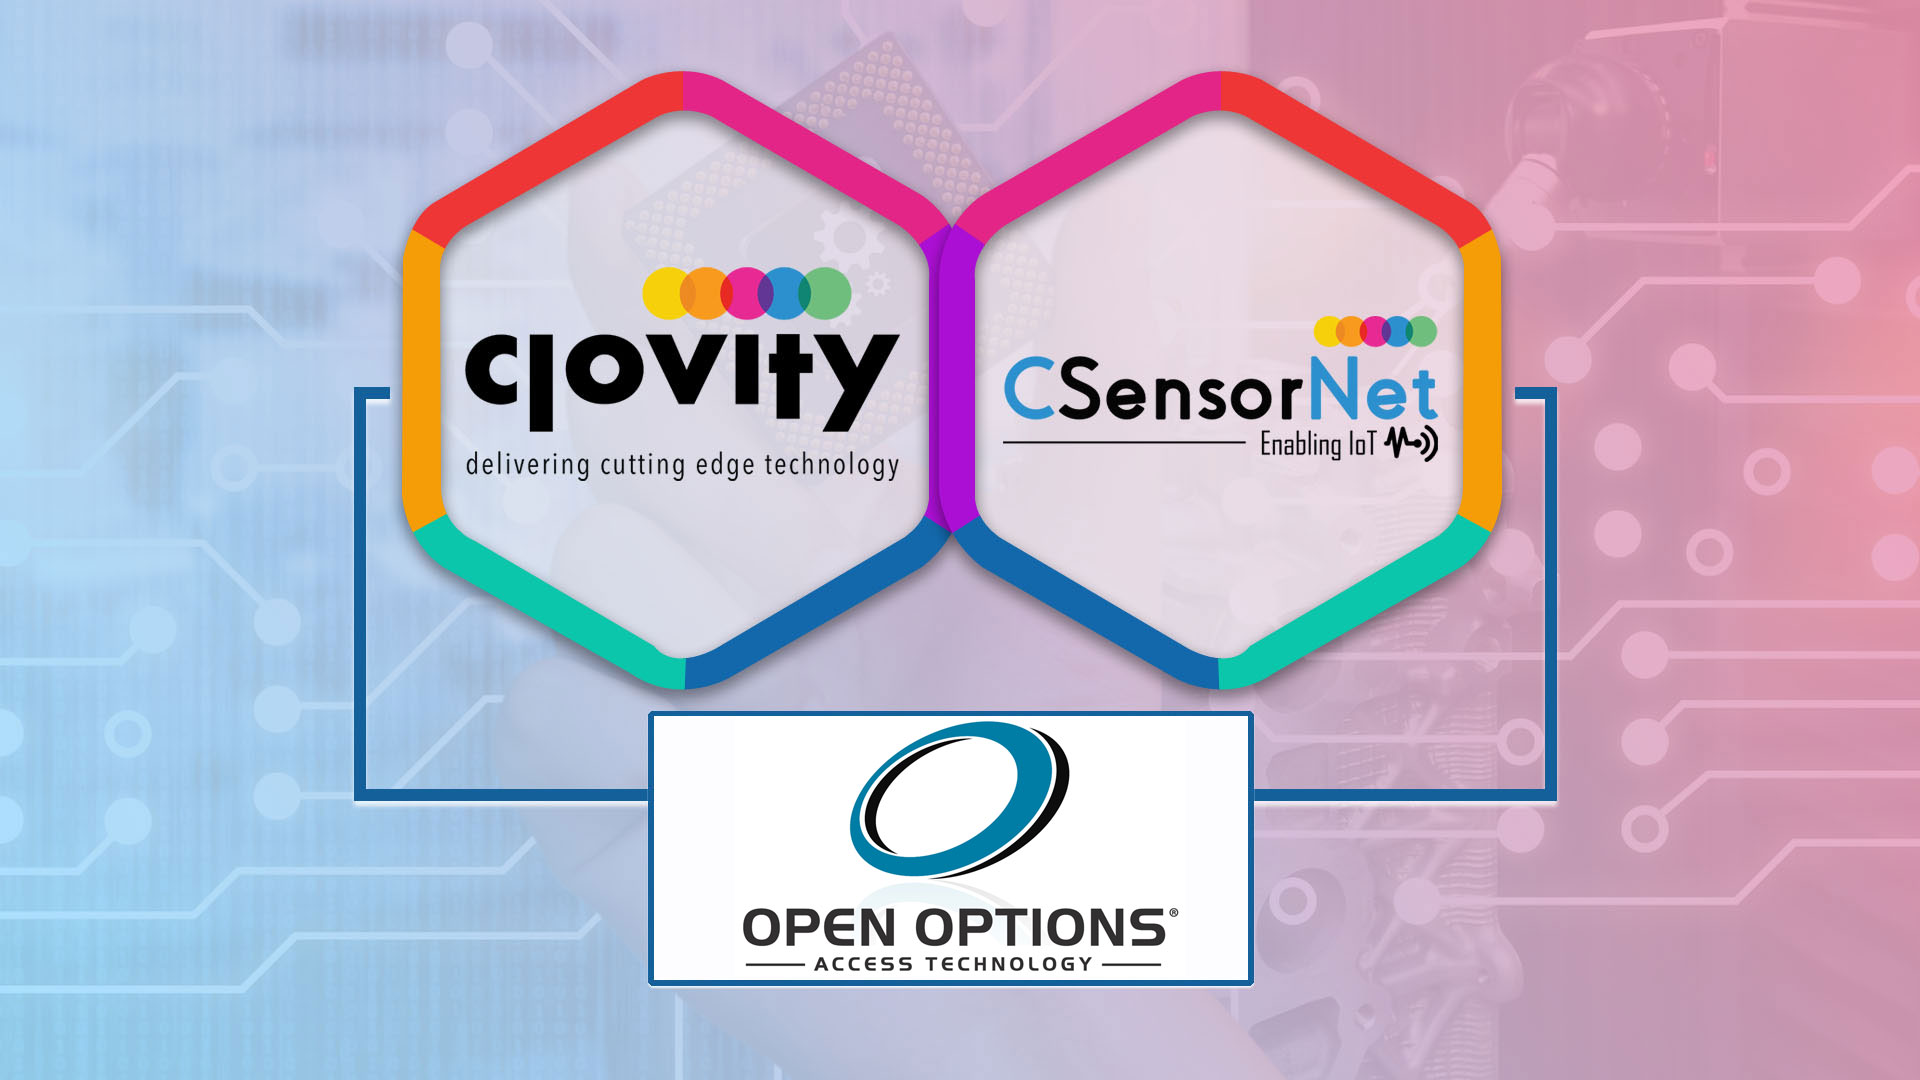 Clovity Partners with Open Options to Provide Enterprise-Grade, Automated Access Management Solutions Through Integration with Its CSensorNet IoT Platform